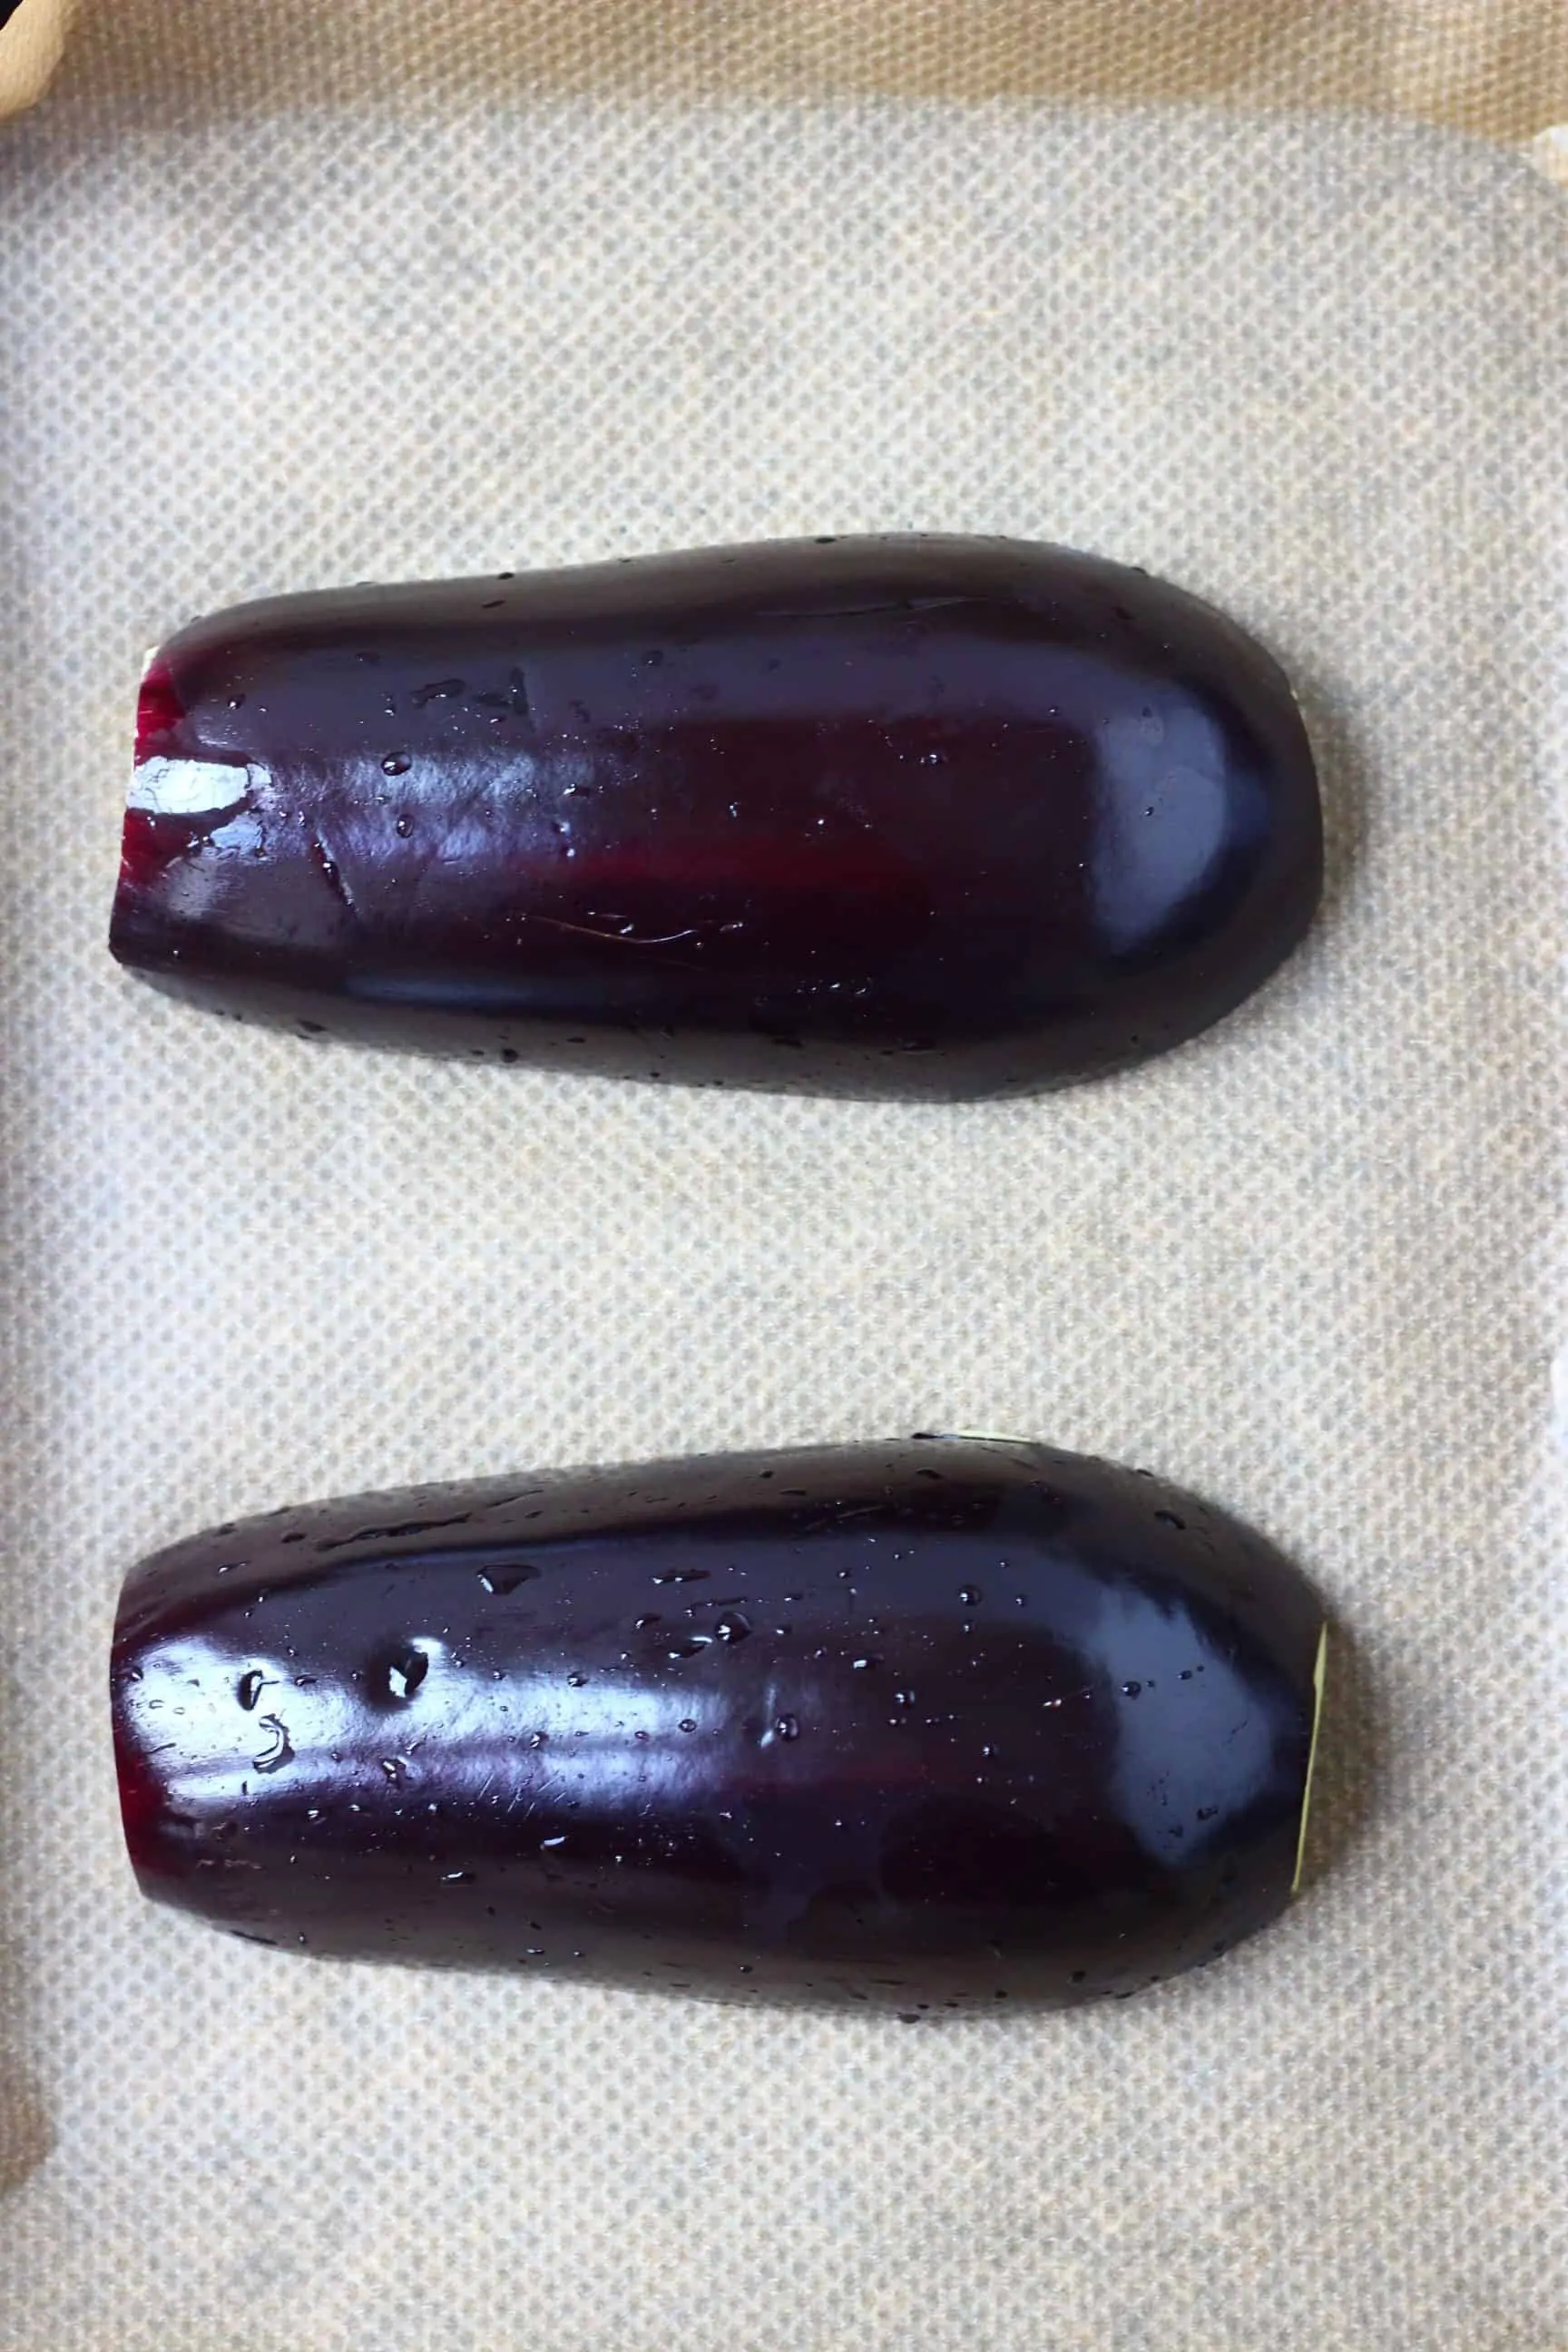 Two eggplant halves lying face down on a baking tray lined with baking paper